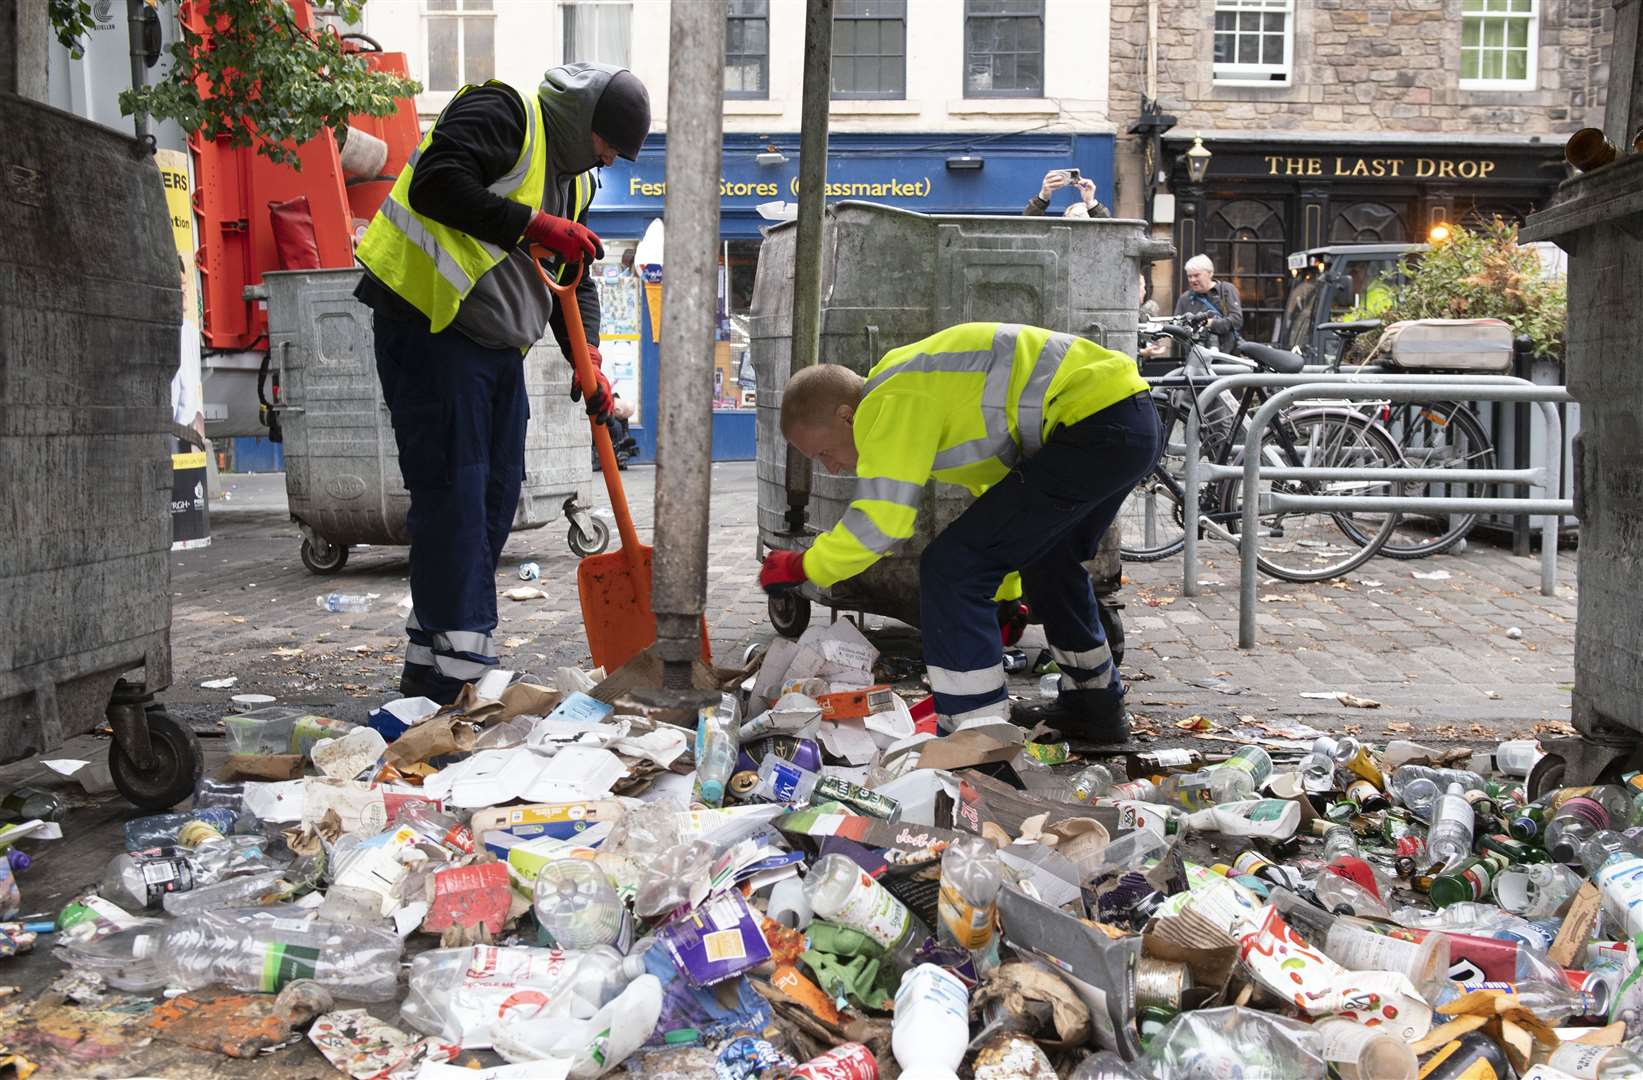 Clean-up work is now under way after the strike action left rubbish piled on the streets (Lesley Martin/PA)